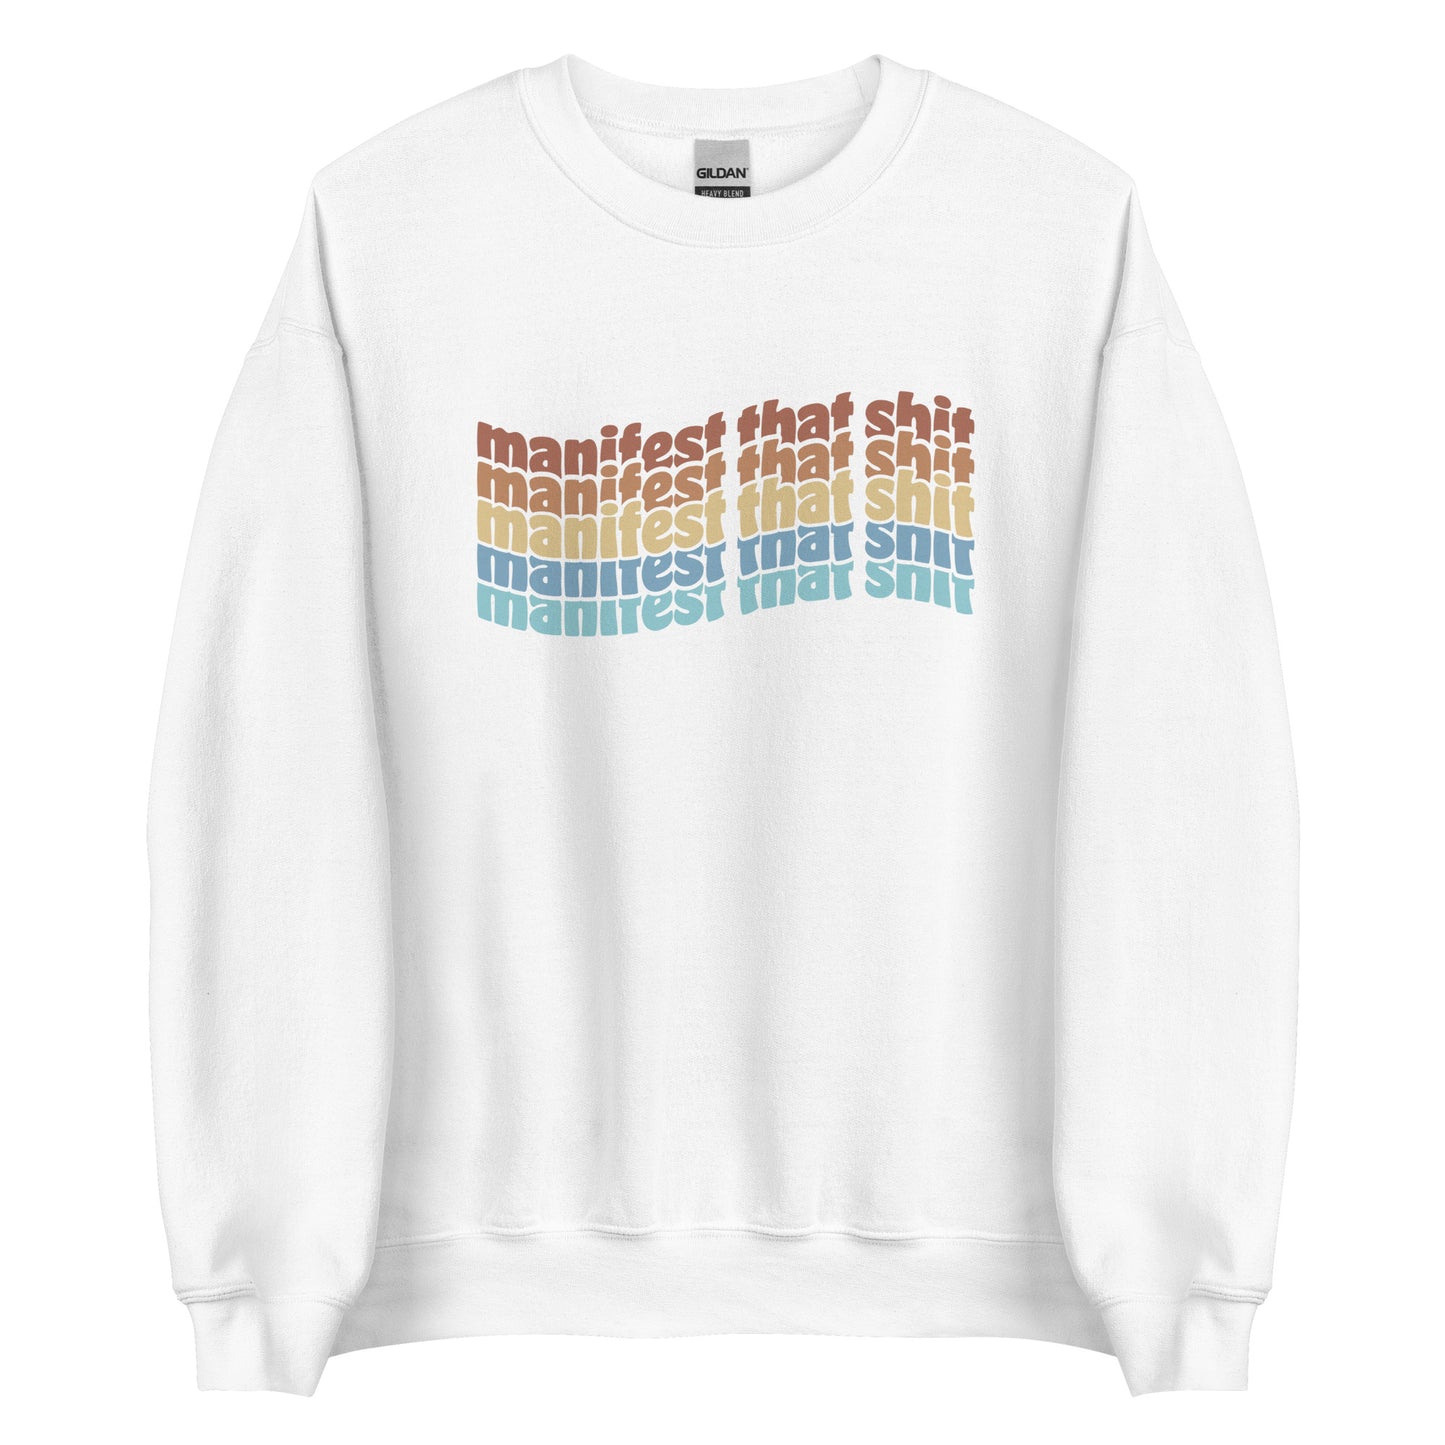 A white crewneck sweatshirt featuring stacked text that reads "manifest that shit" in a rainbow of colors.